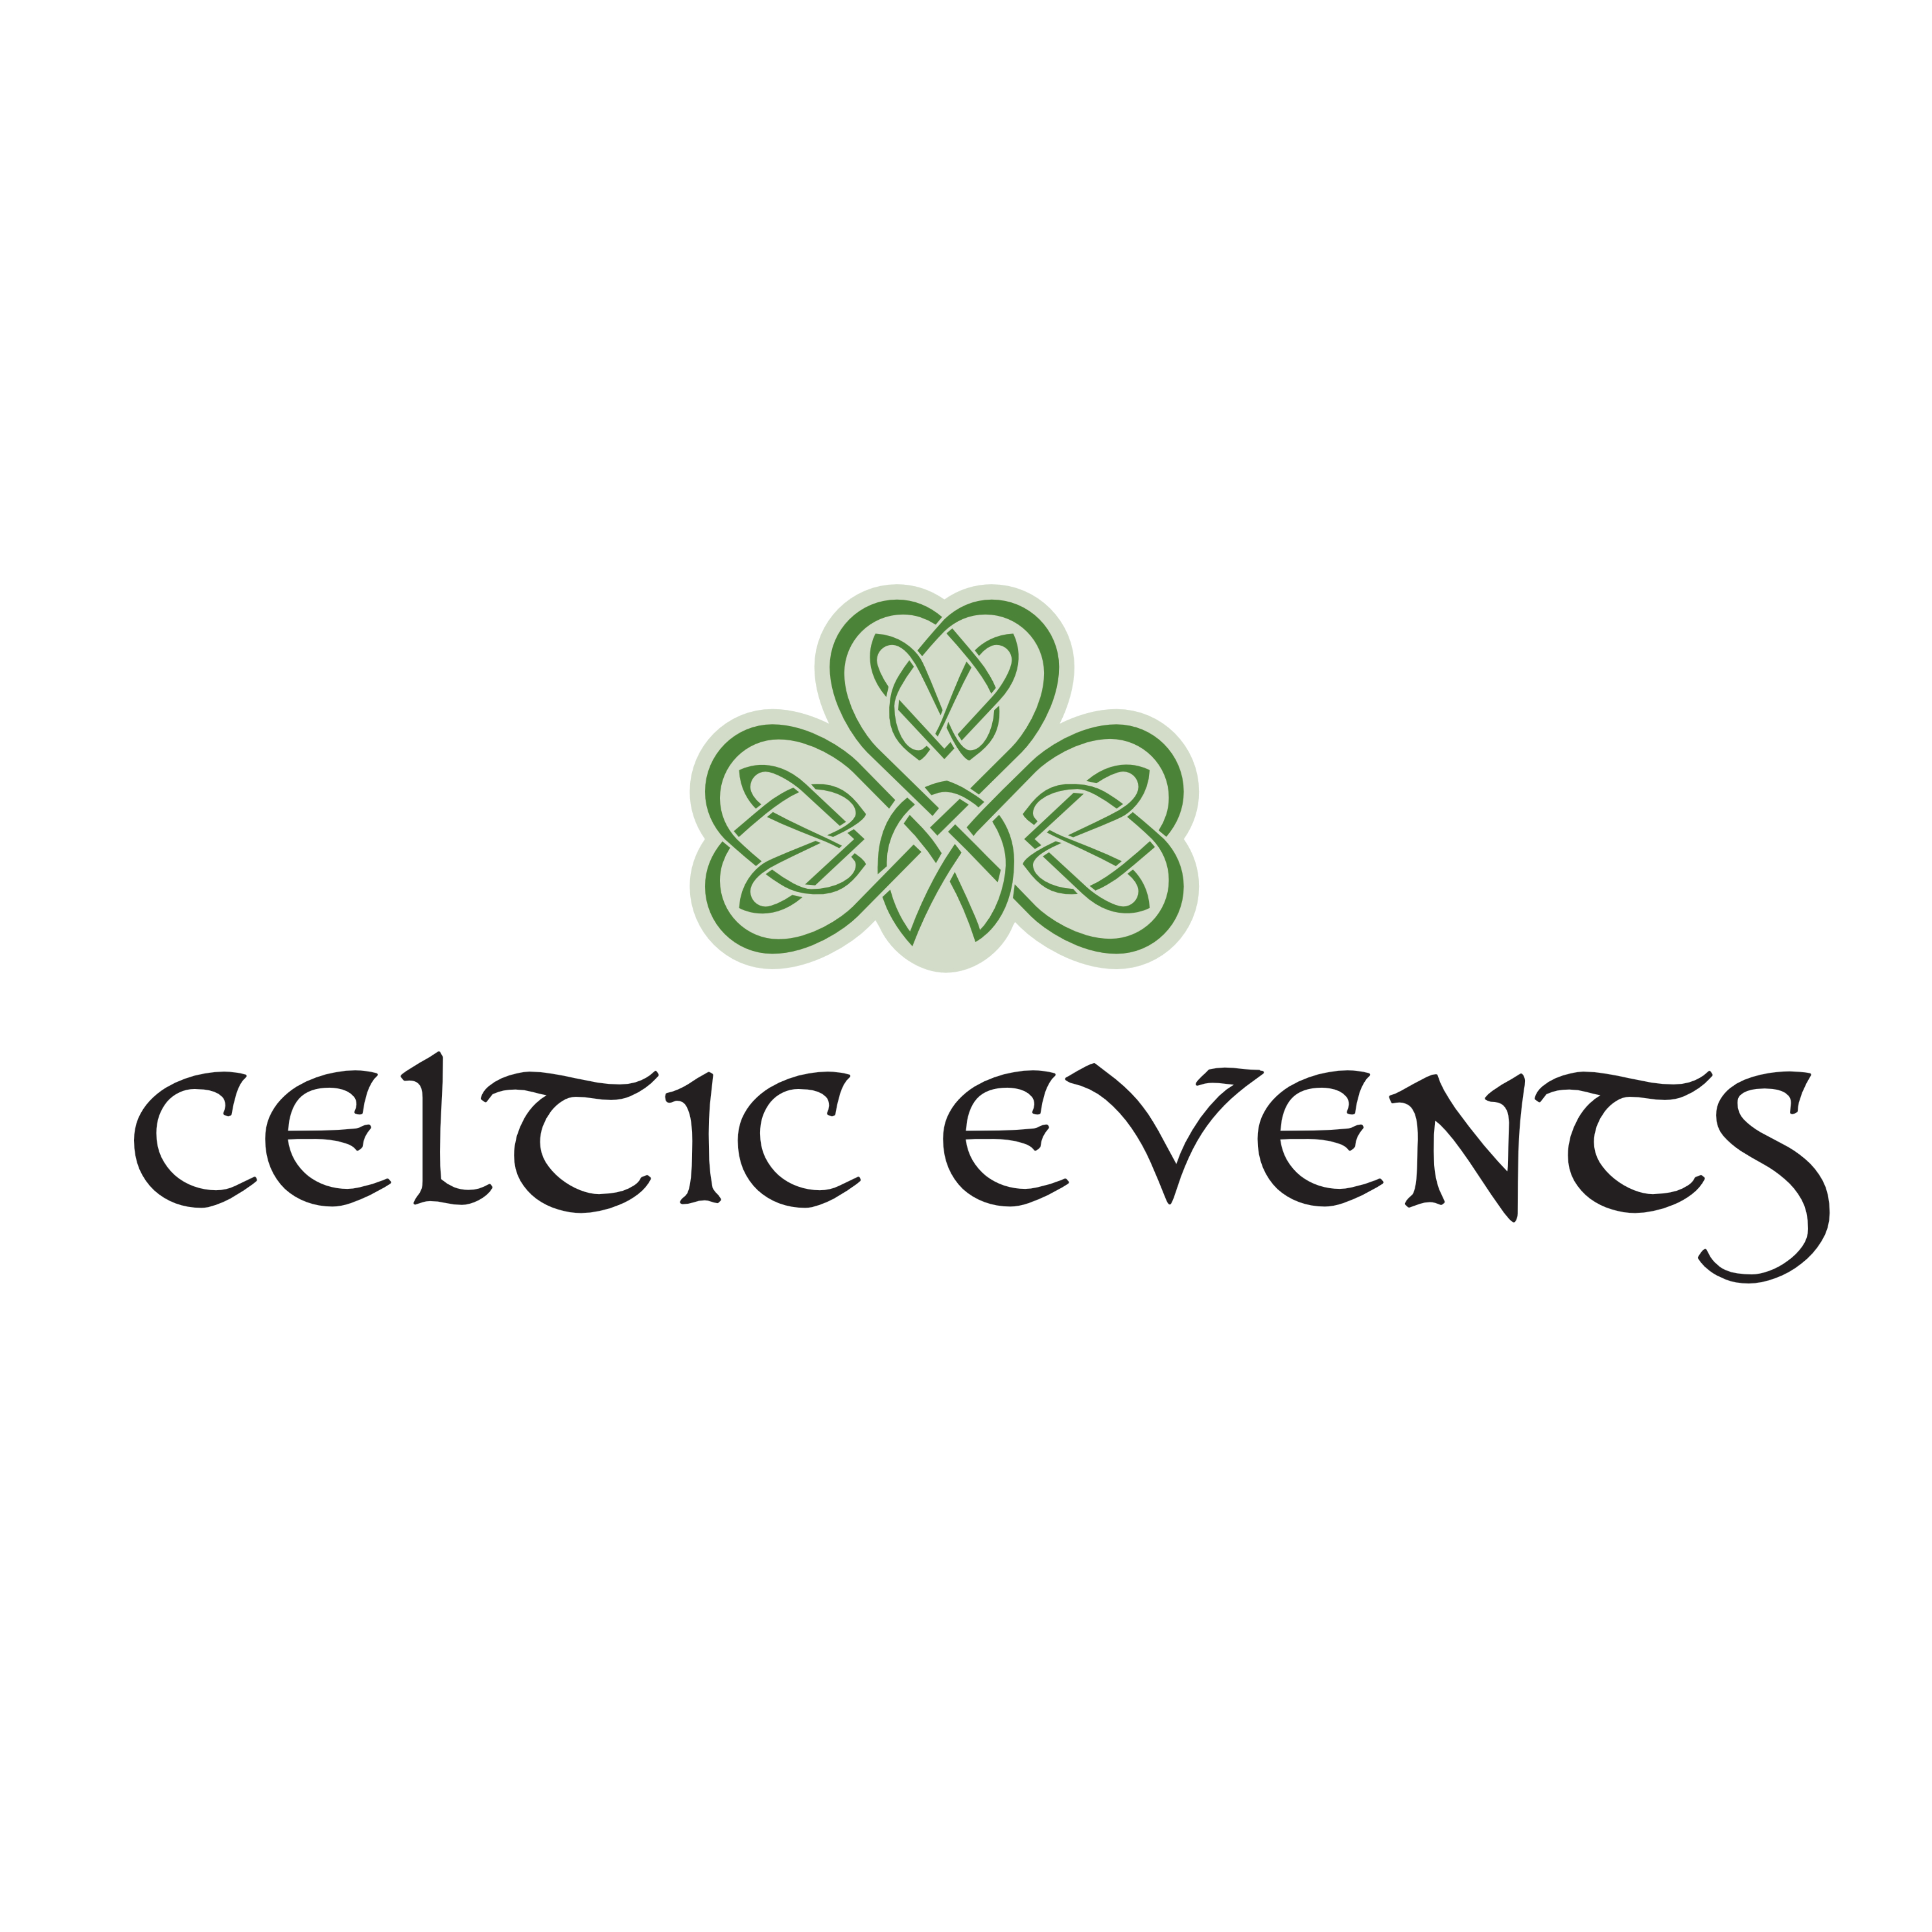 Celtic Events